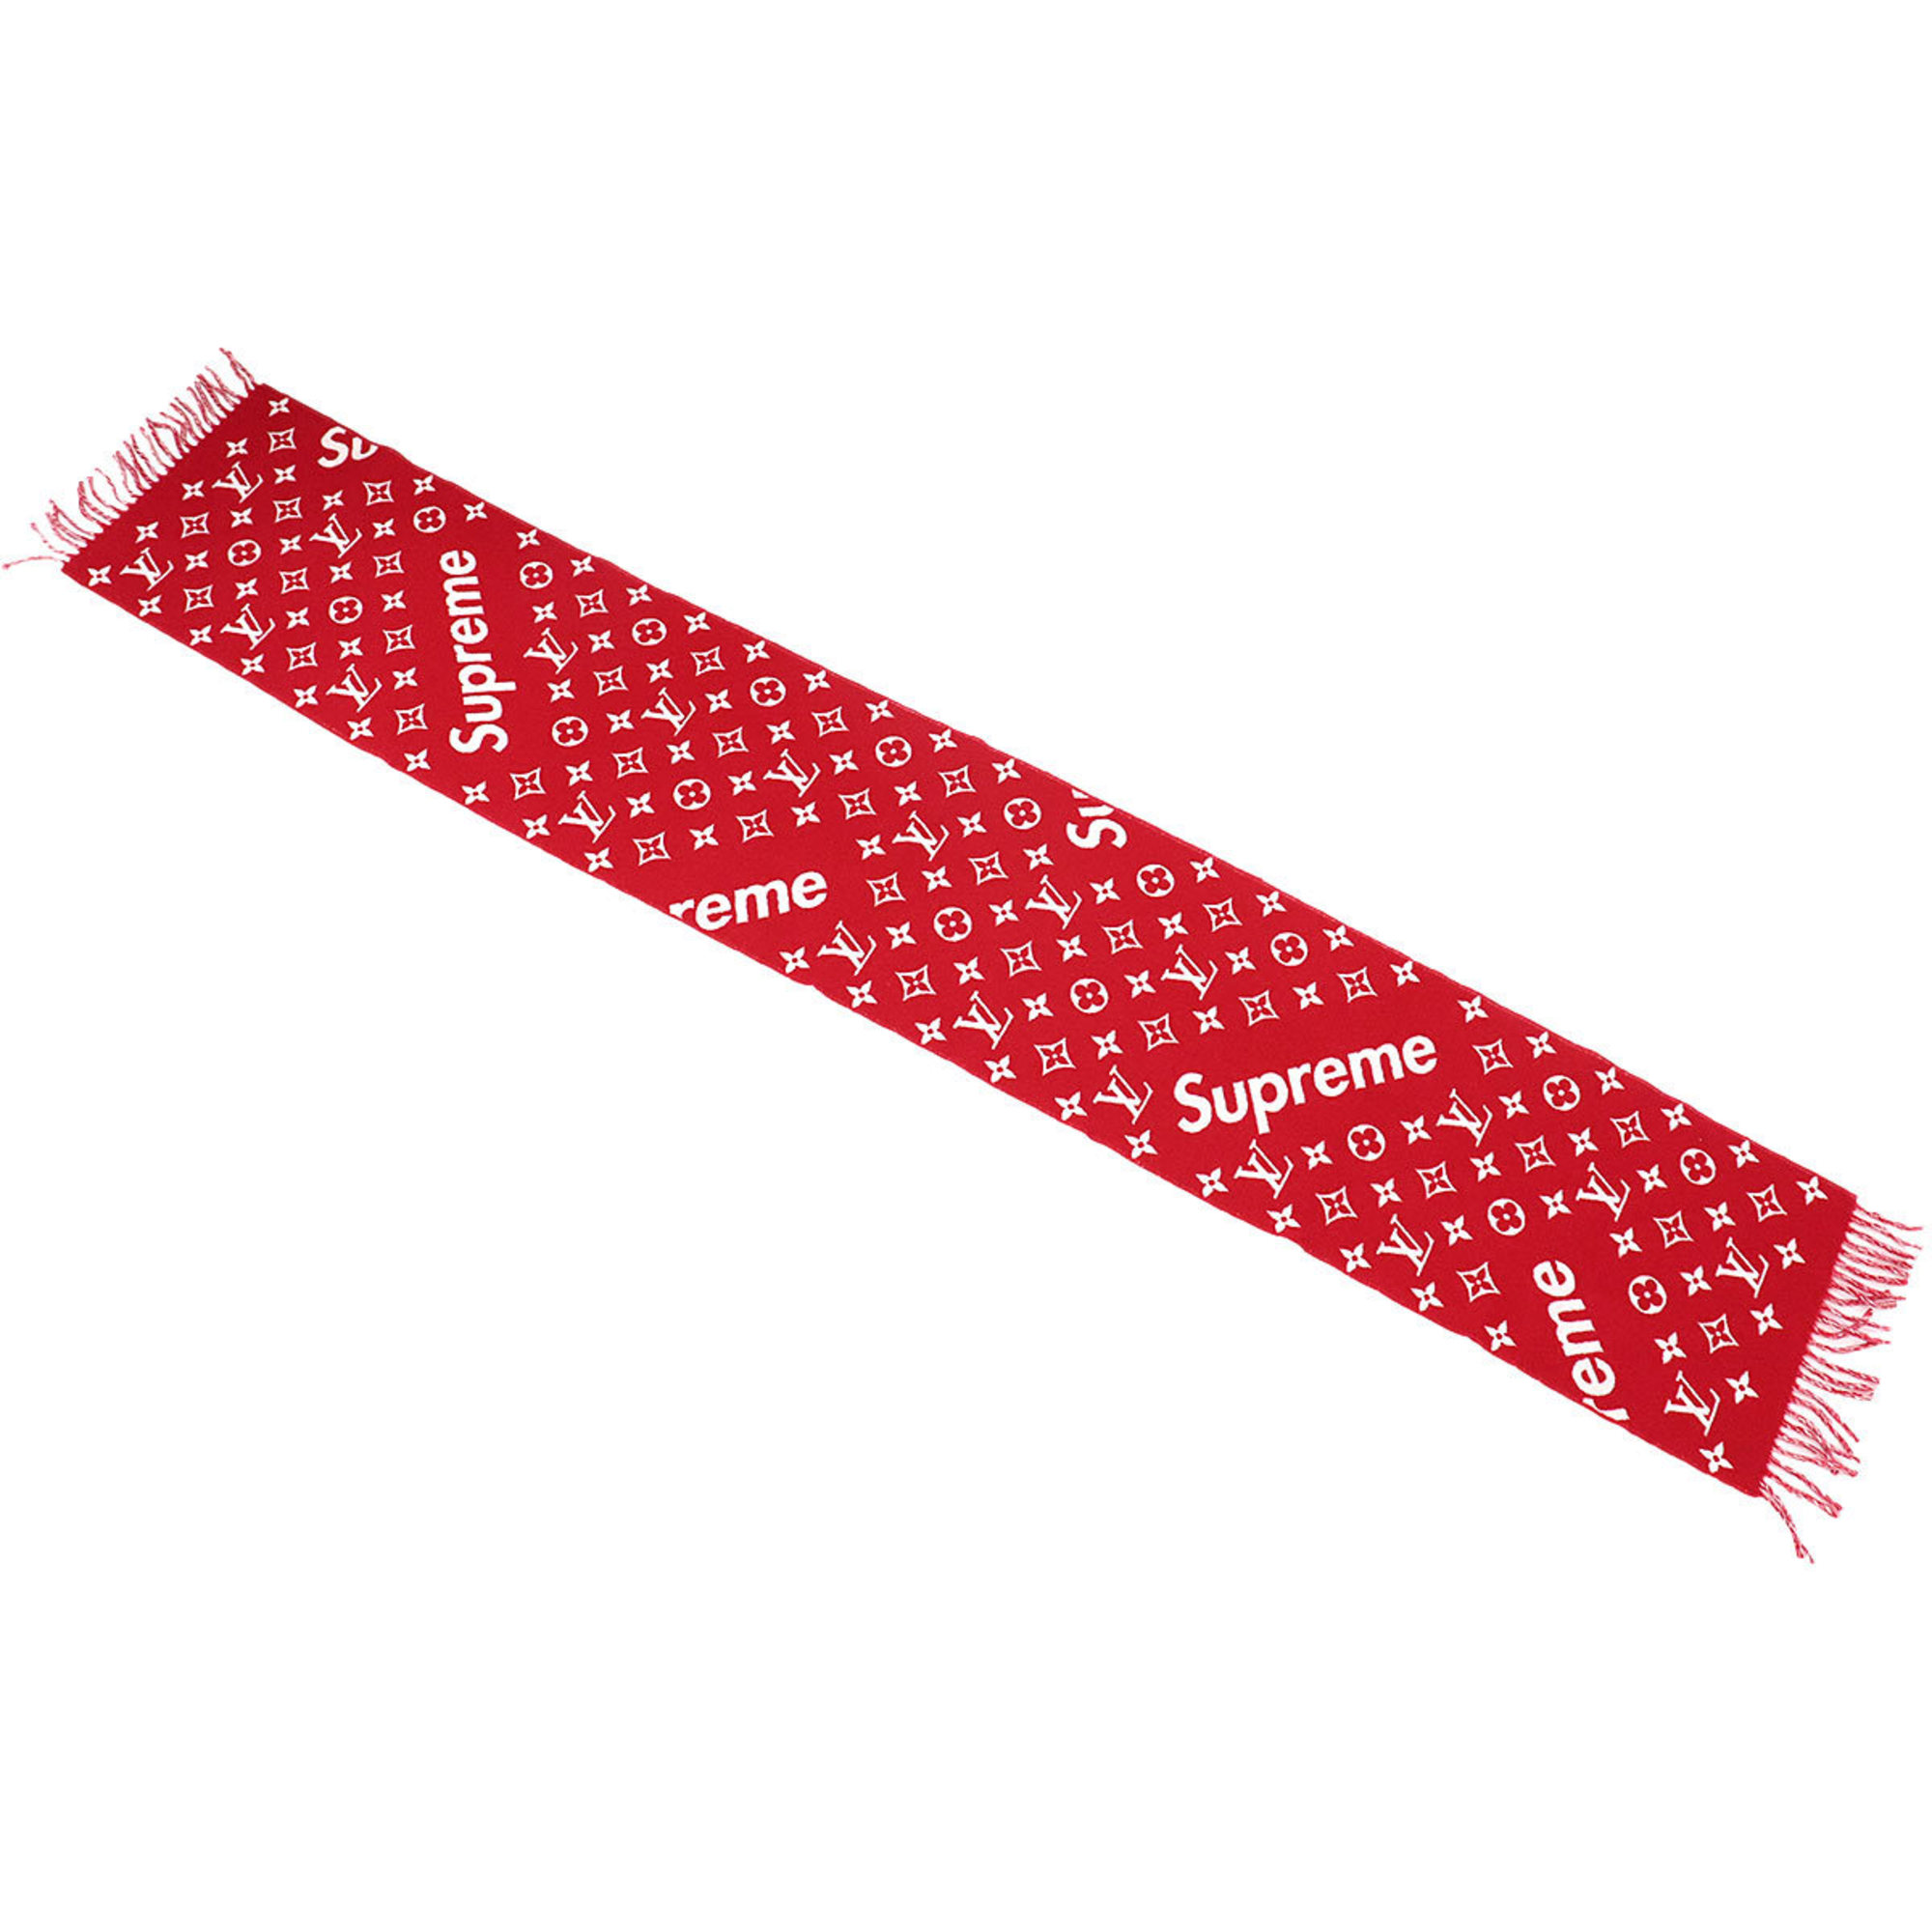 LOUIS VUITTON Supreme Collaboration Scarf Stole Wool Cashmere Red White  MP1890 Winter | eLADY Globazone